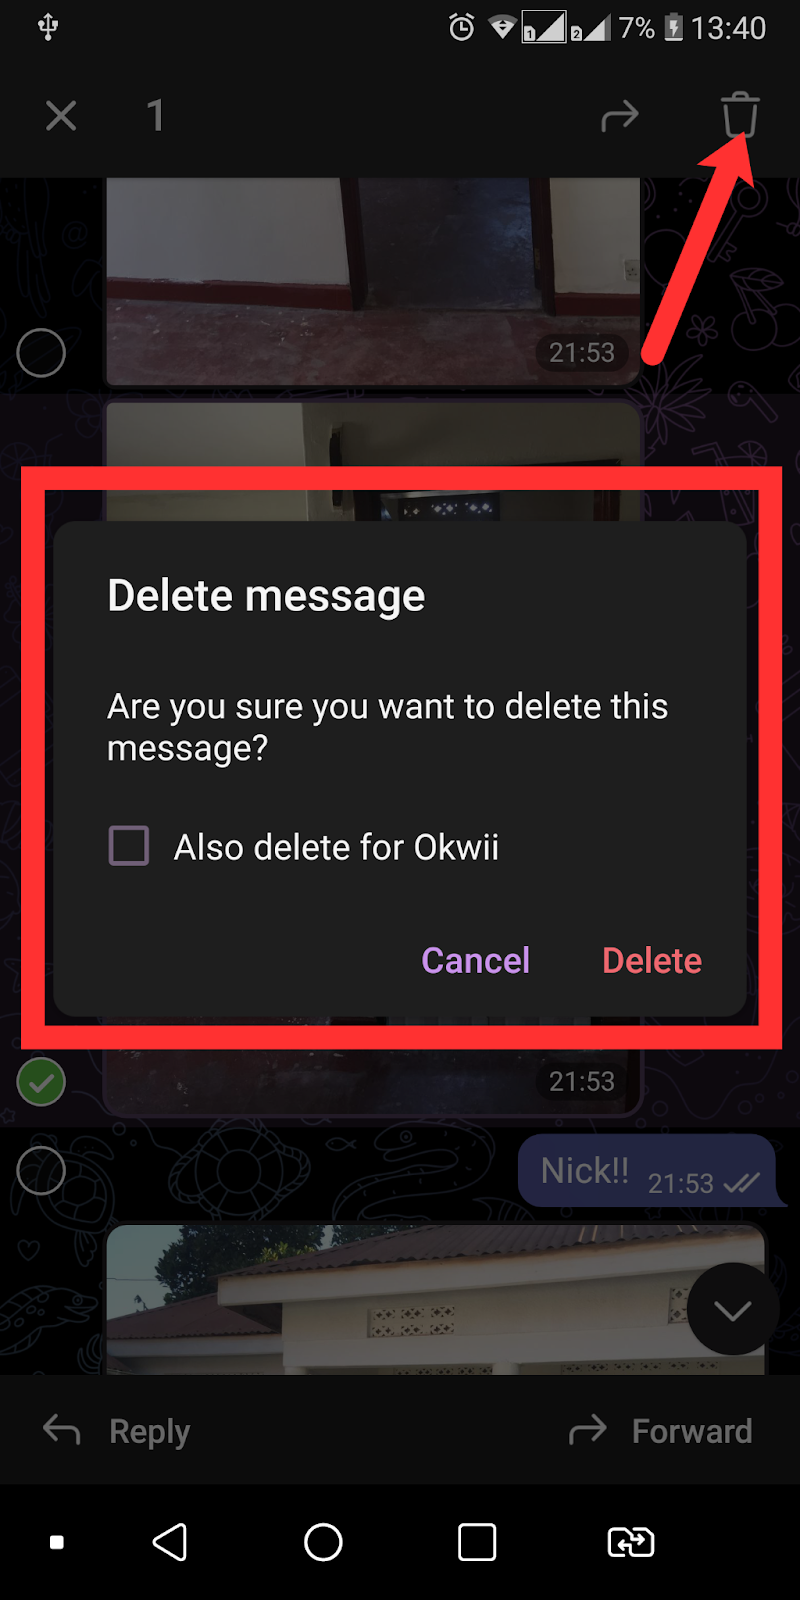 confirm the delete message prompt